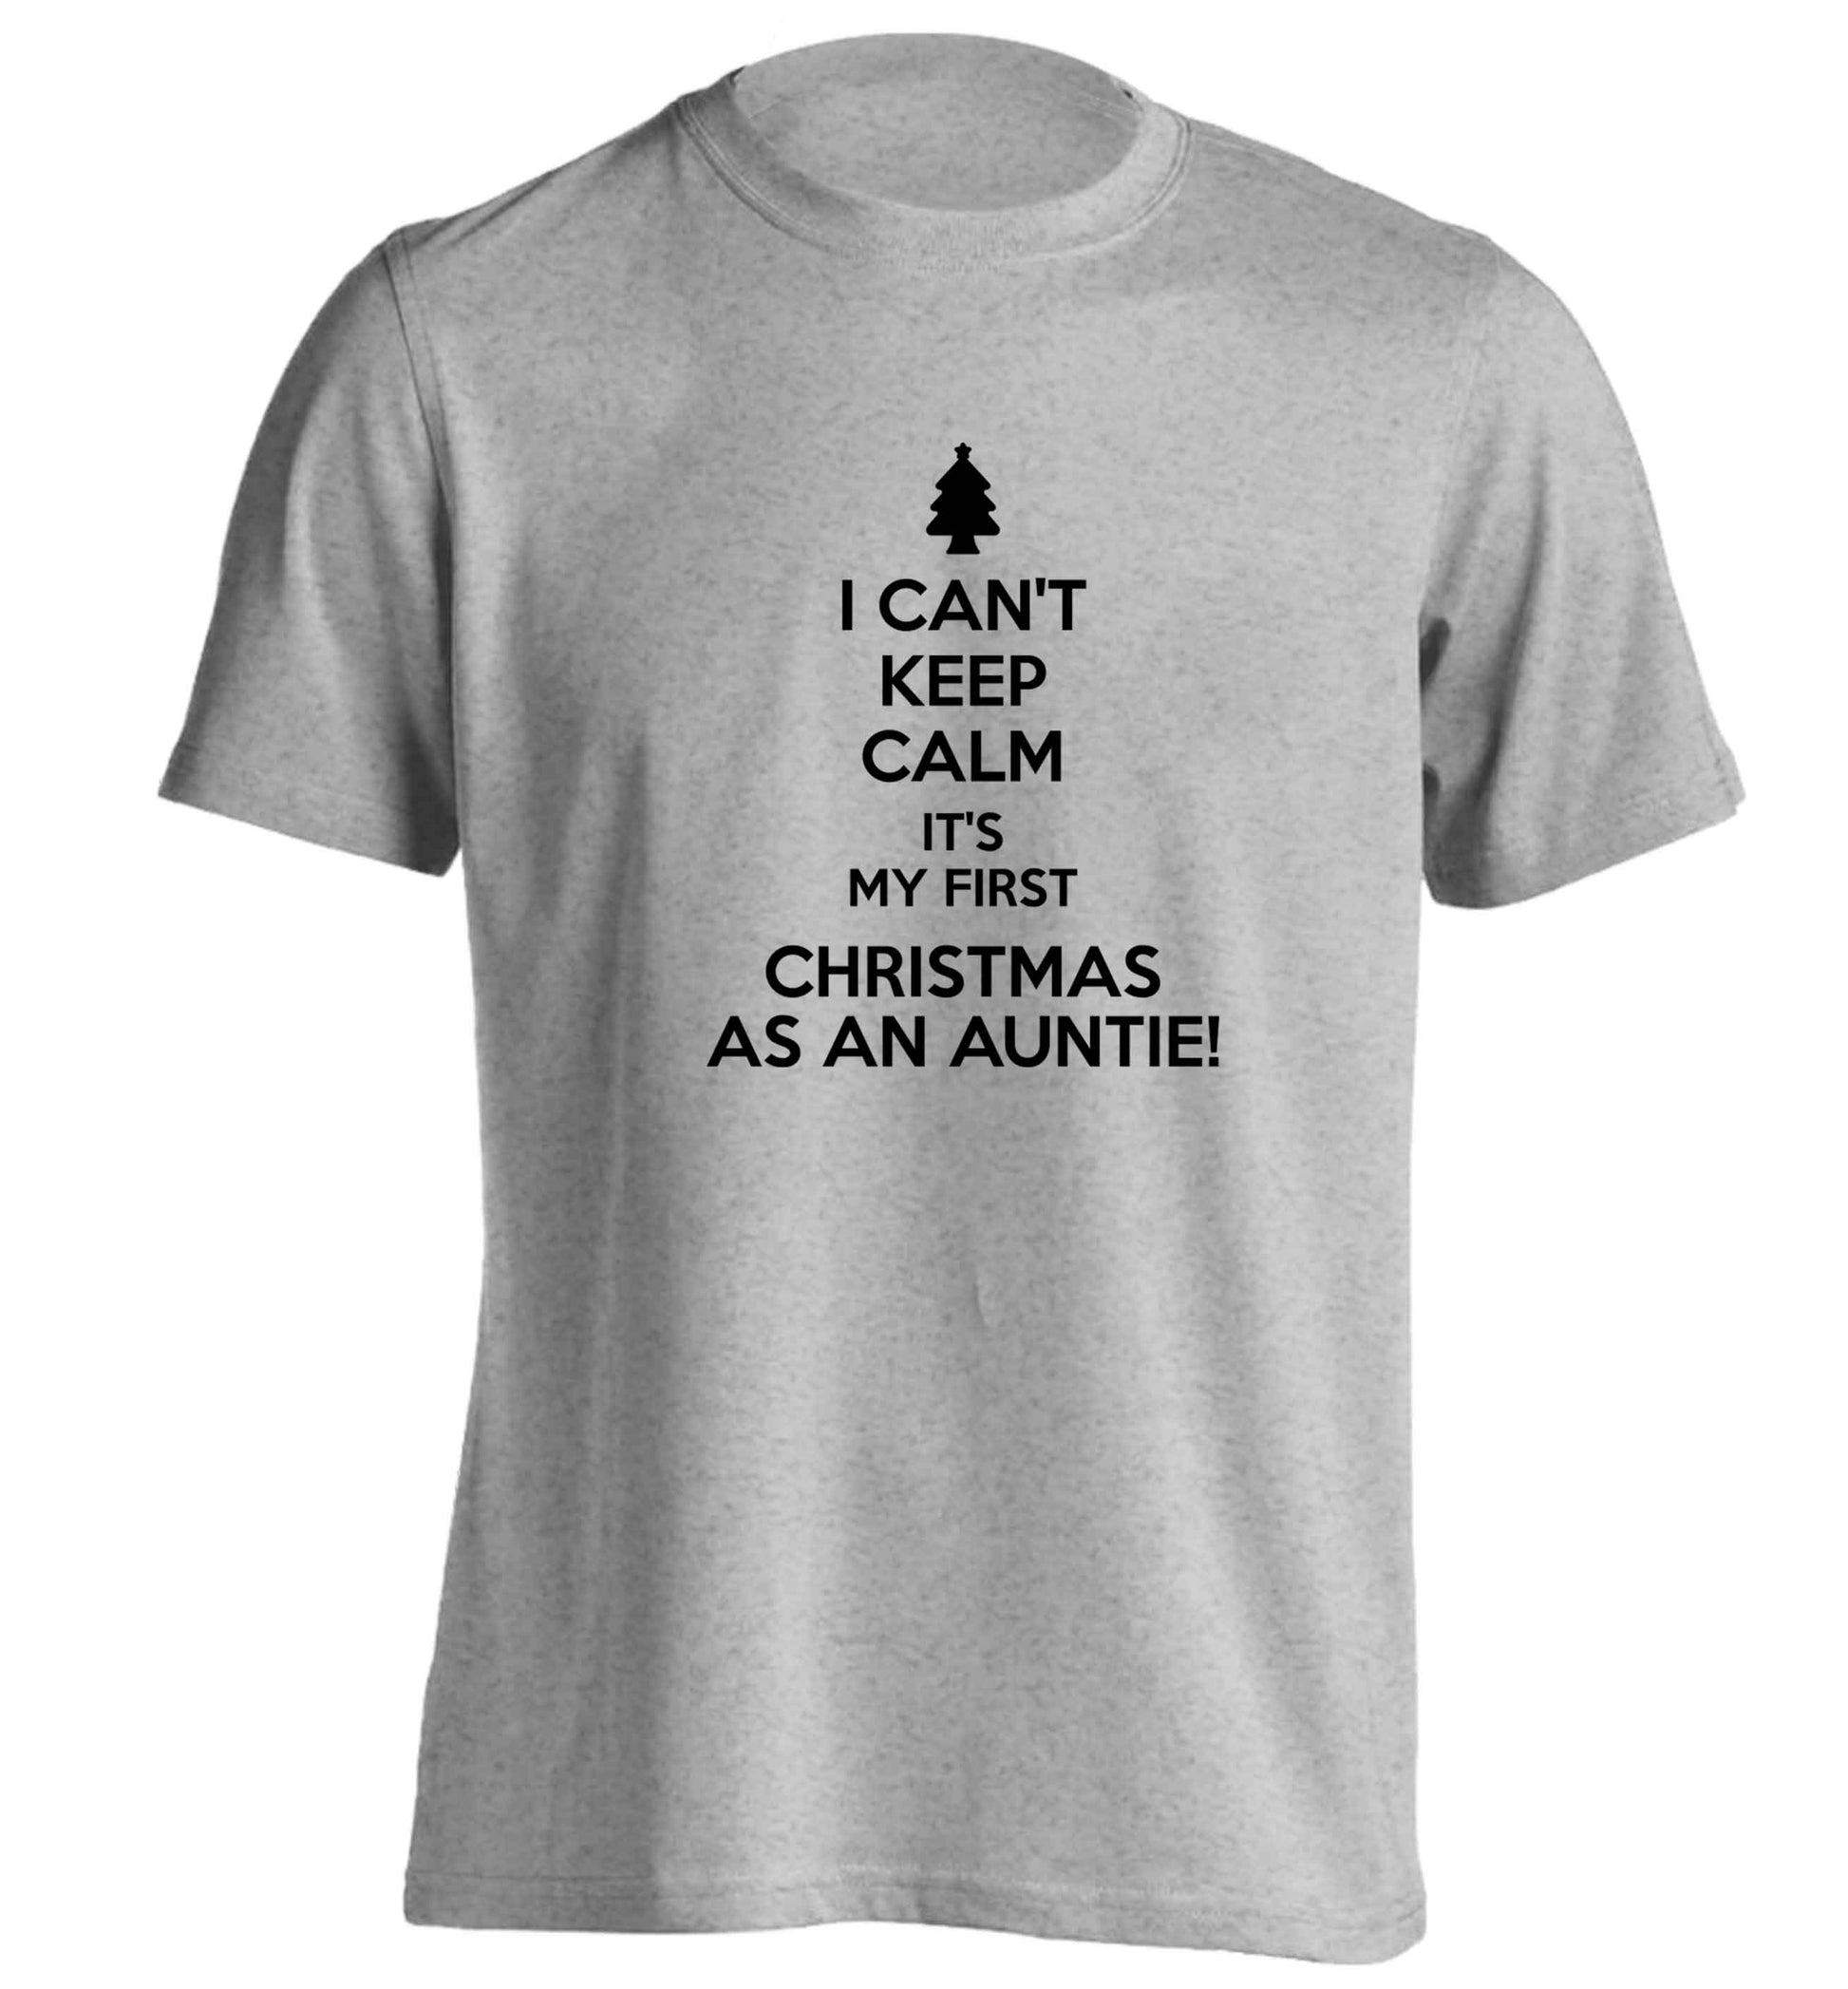 I can't keep calm it's my first Christmas as an auntie! adults unisex grey Tshirt 2XL